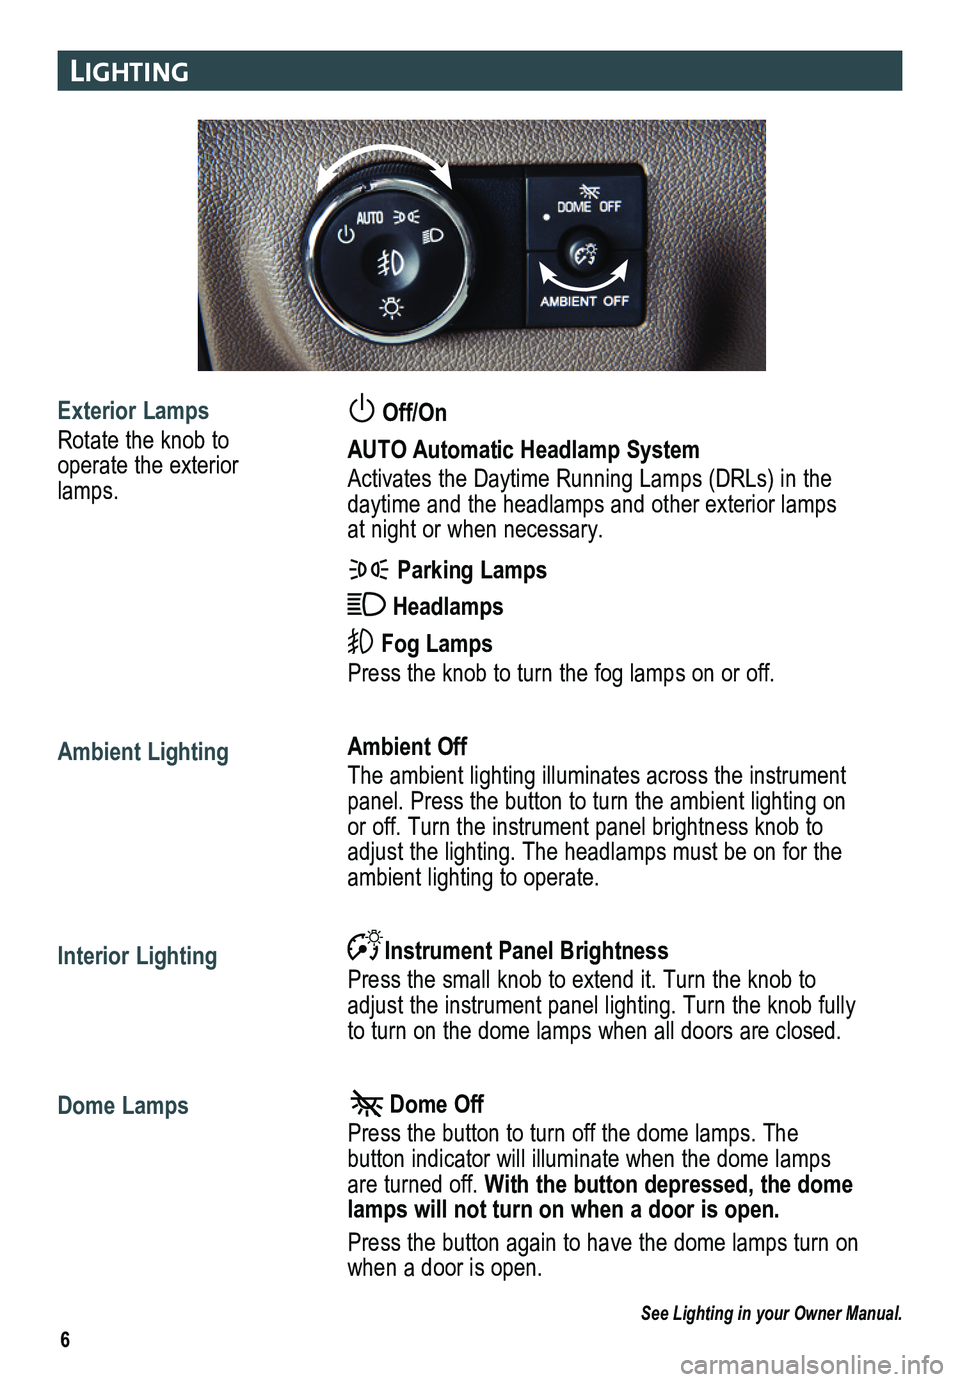 GMC ACADIA 2015  Get To Know Guide 6
lIghtIng
Exterior Lamps
Rotate the knob to operate the exterior lamps.
 
Ambient Lighting
 
Interior Lighting
Dome Lamps
 
 Off/On 
AUTO Automatic Headlamp System
Activates the Daytime Running Lamps